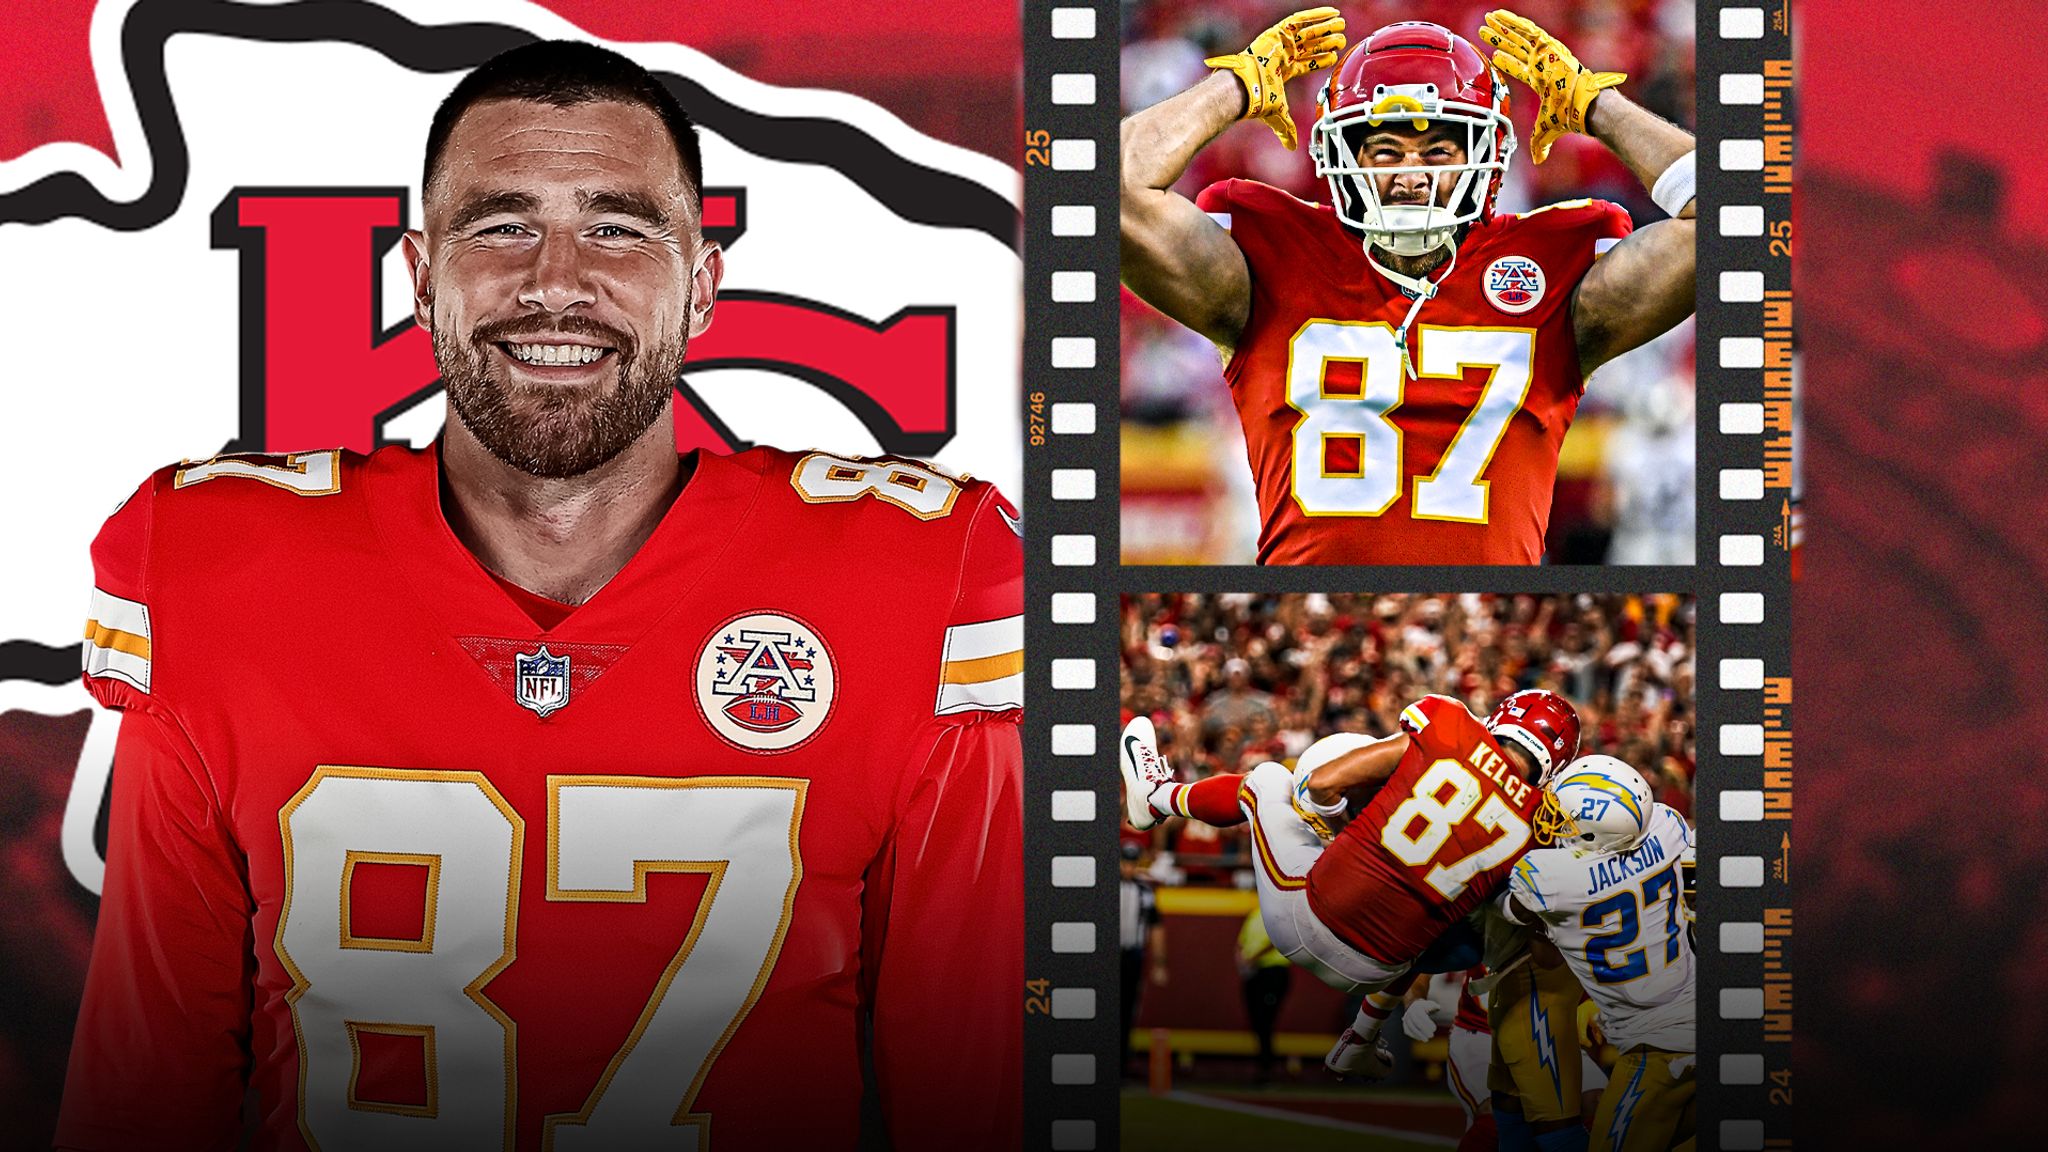 Travis Kelce: The Kansas City Chiefs tight end's rise to NFL